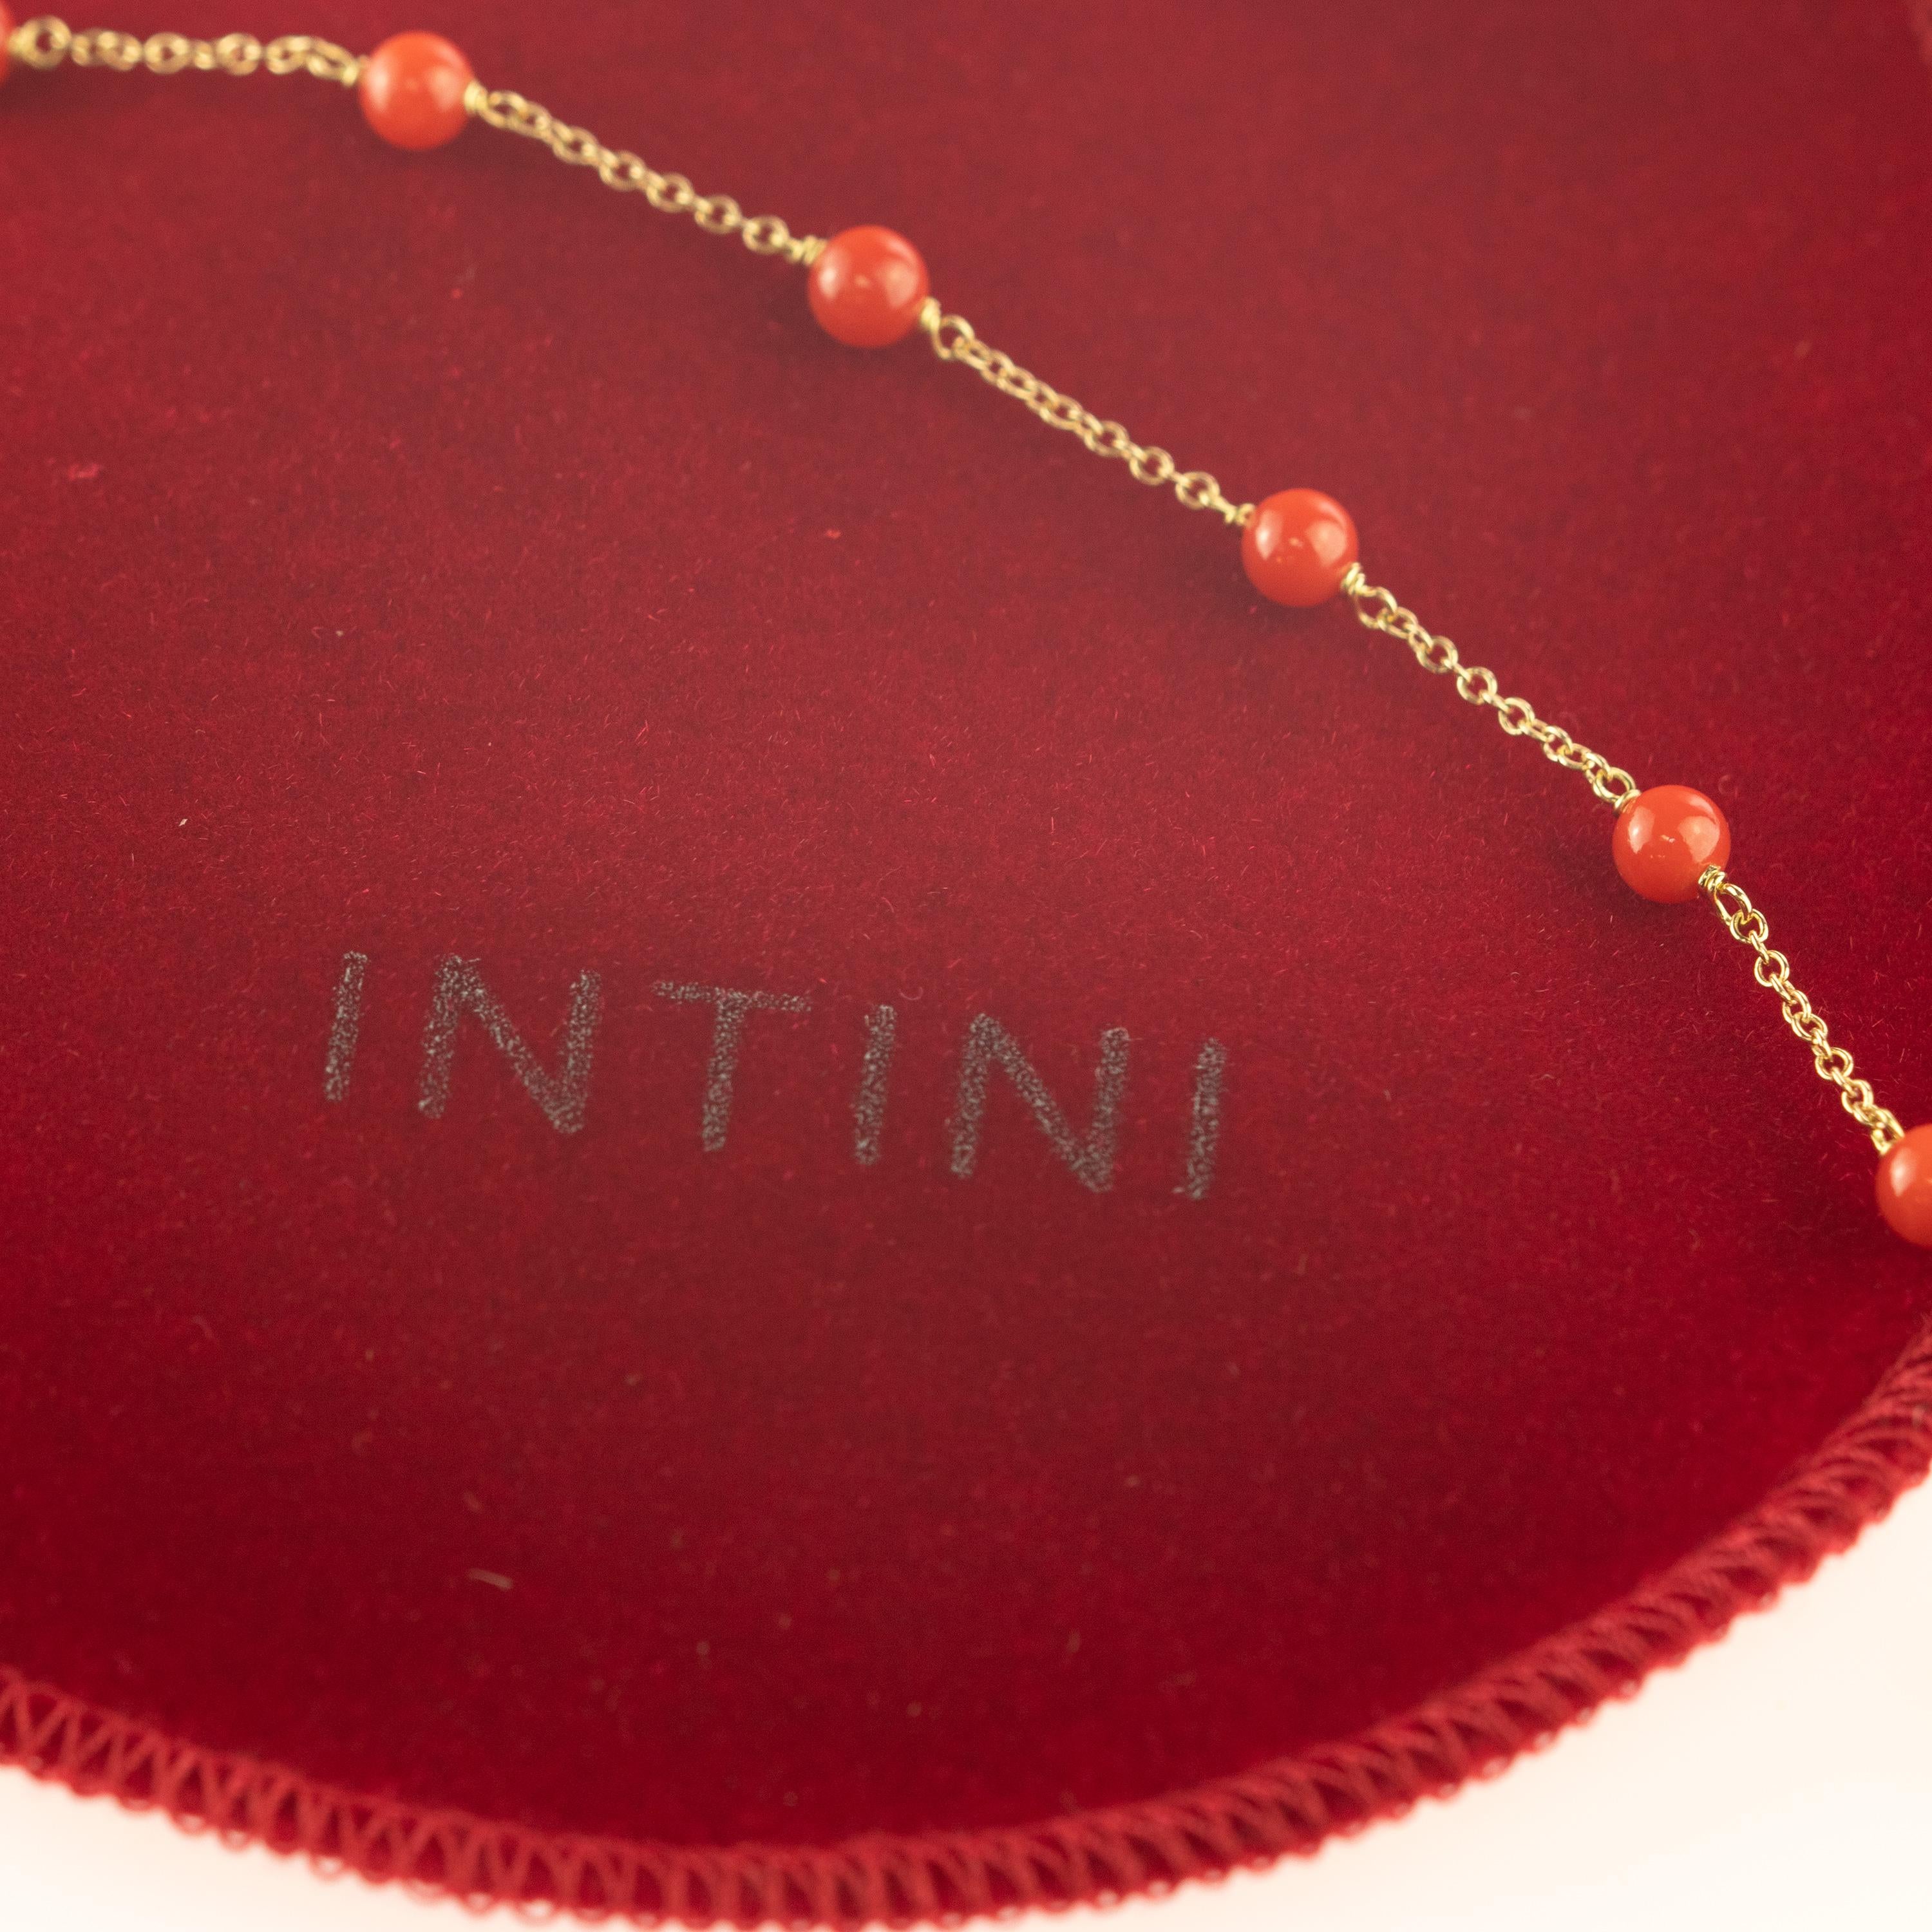 Intini Jewes 18 Karat Gold Chain Mediterranean Red Coral Spheres Chic Bracelet For Sale 2